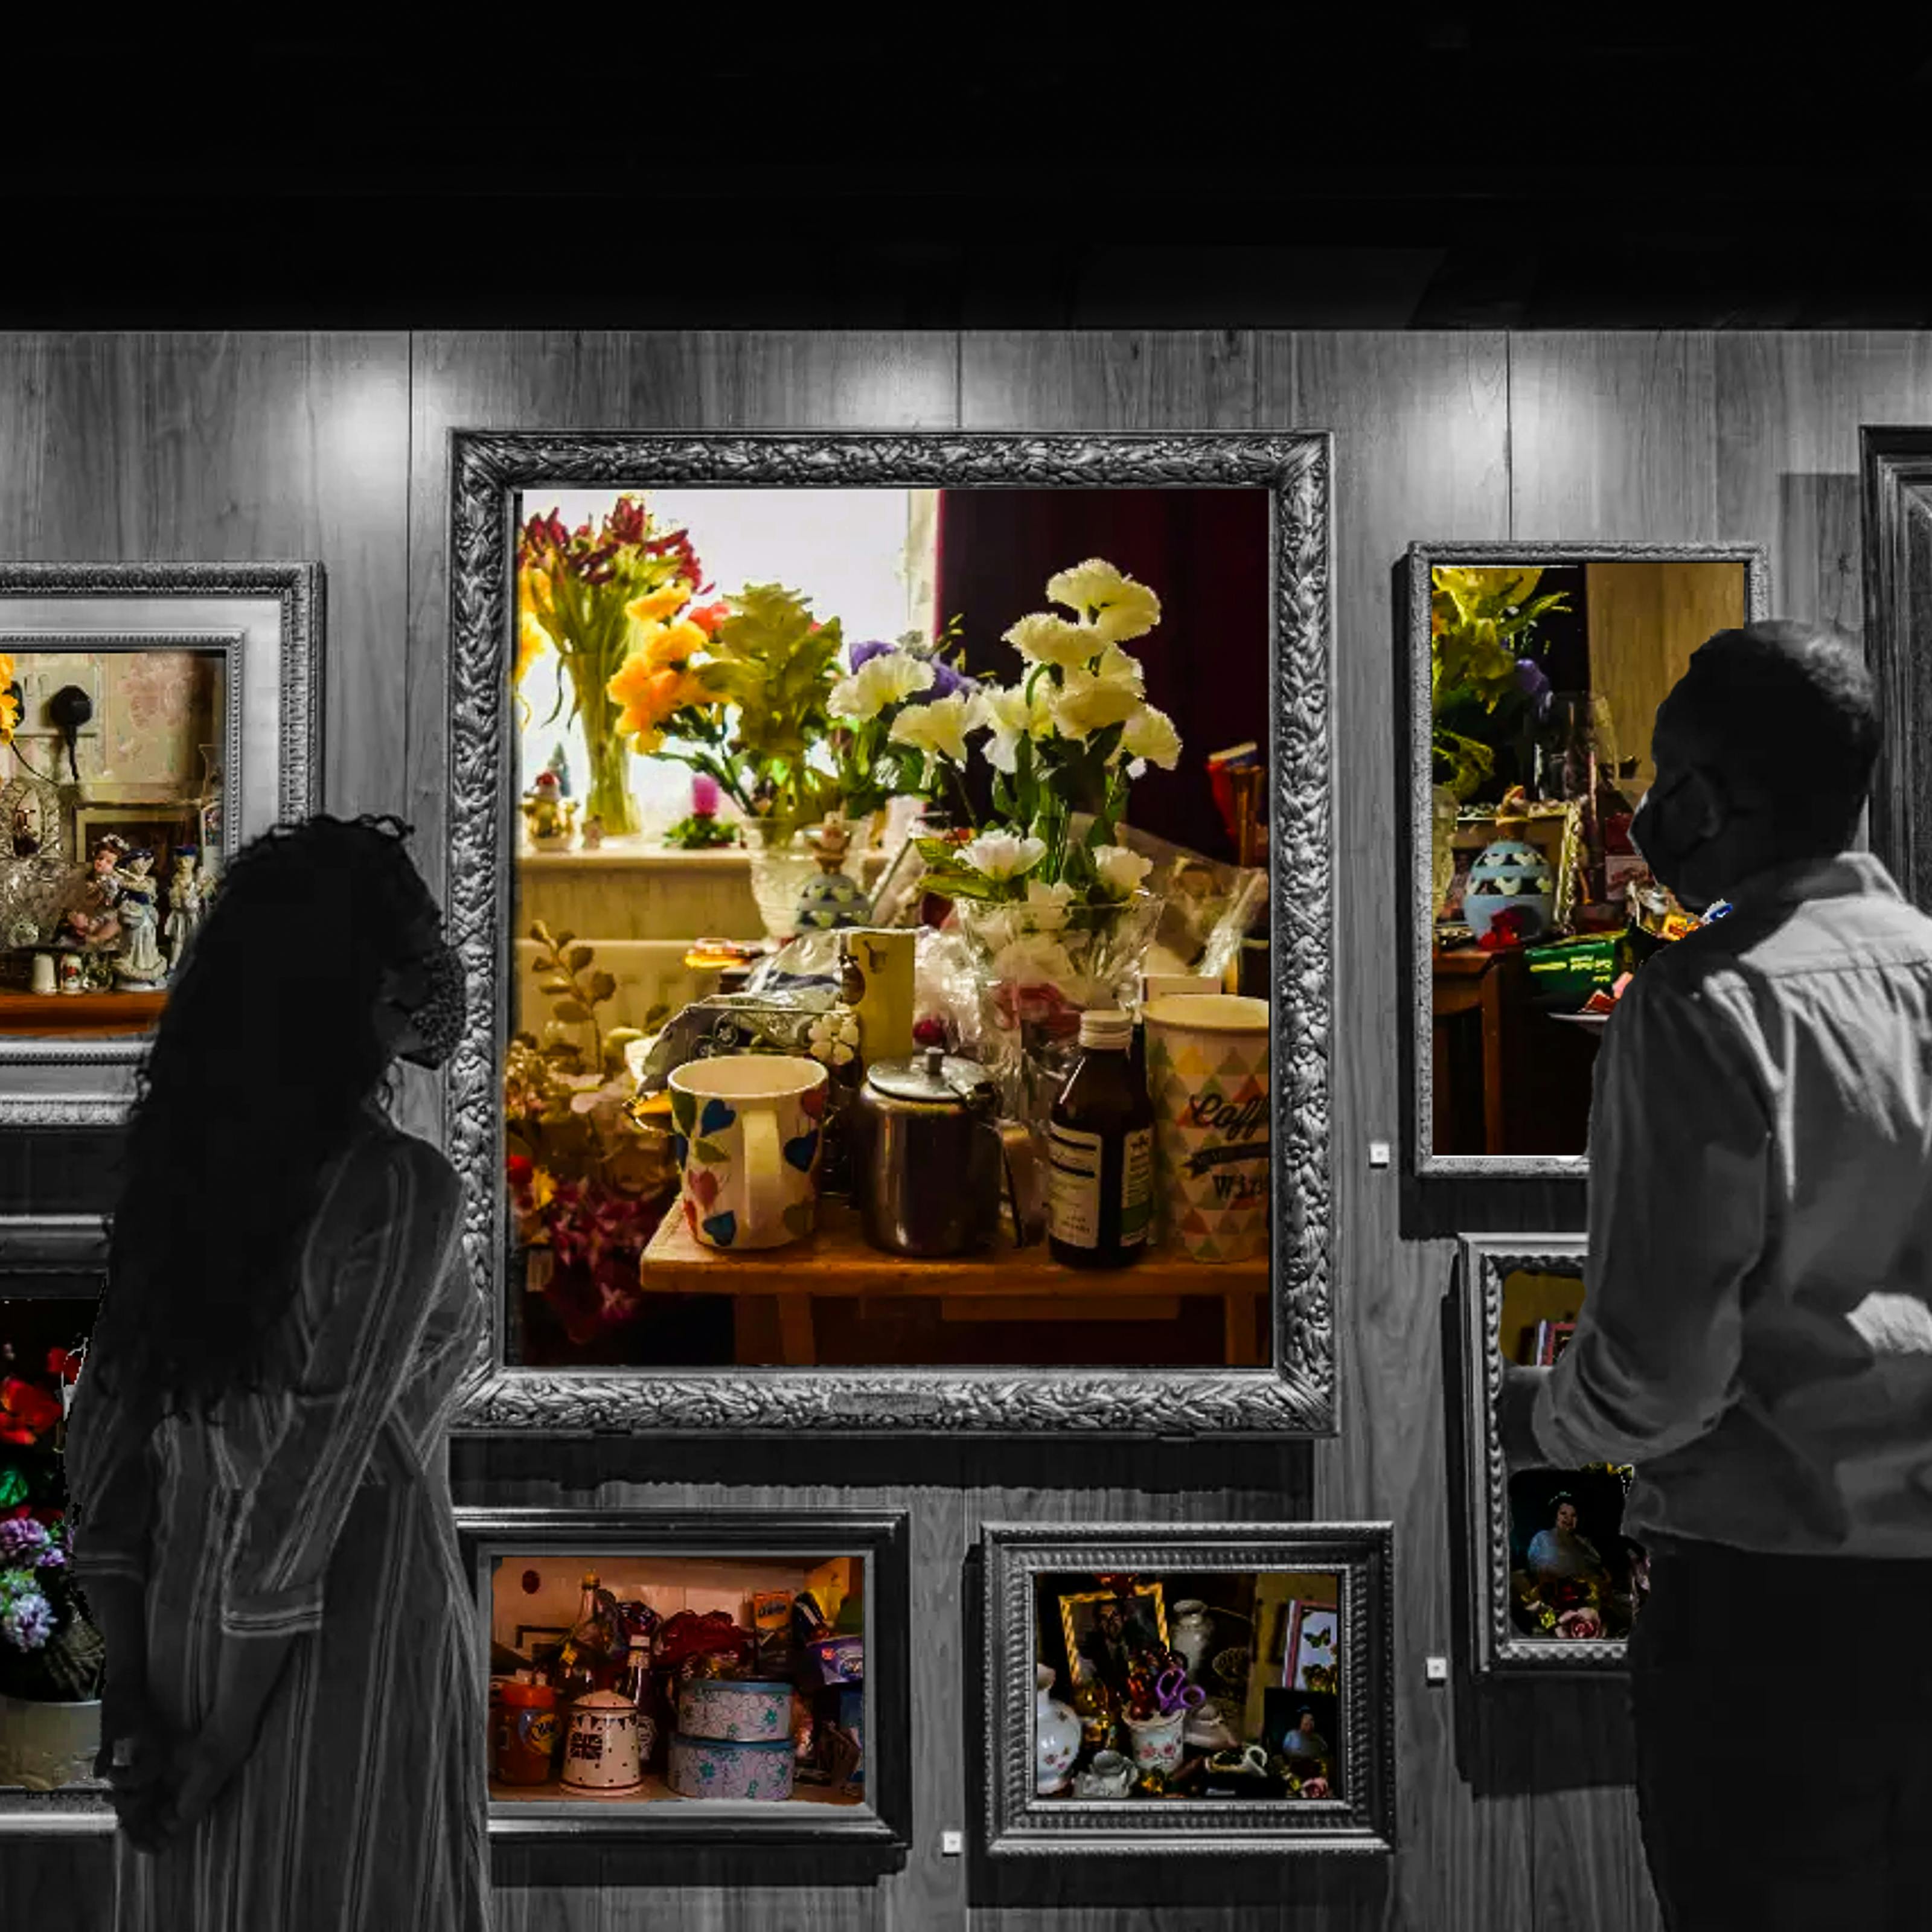 Black and white photograph showing a wall in a museum covered in large ornate picture frames. In the foreground are two people facing the wall of frames and wearing masks. Inside the black and white frames are colourful photographs showing different household objects. The largest frame in the center shows a table that has lots of things on top of it, all packed very close together, including vases of flowers, a mug and coffeepot, and medicine. On the windowsill behind the table are more flowers. The frame to the right shows a photo of a an equally crowded table, holding photo frames, flowers and various other trinkets. 